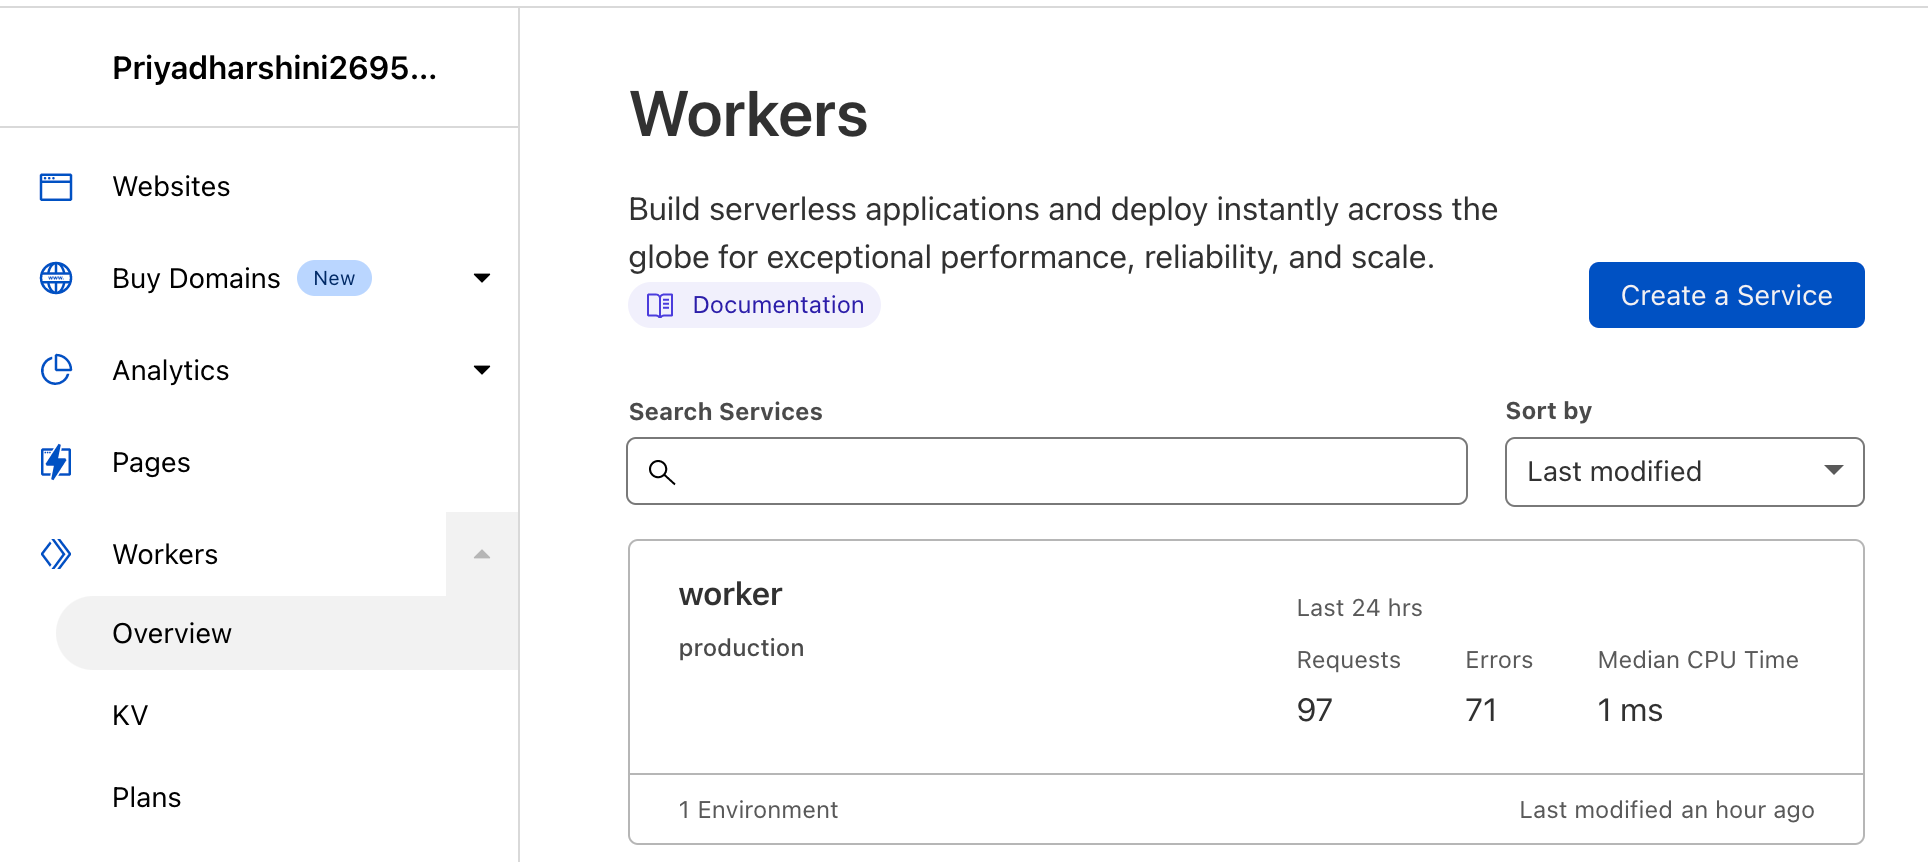 View and Manage workers in Cloudflare dashboard